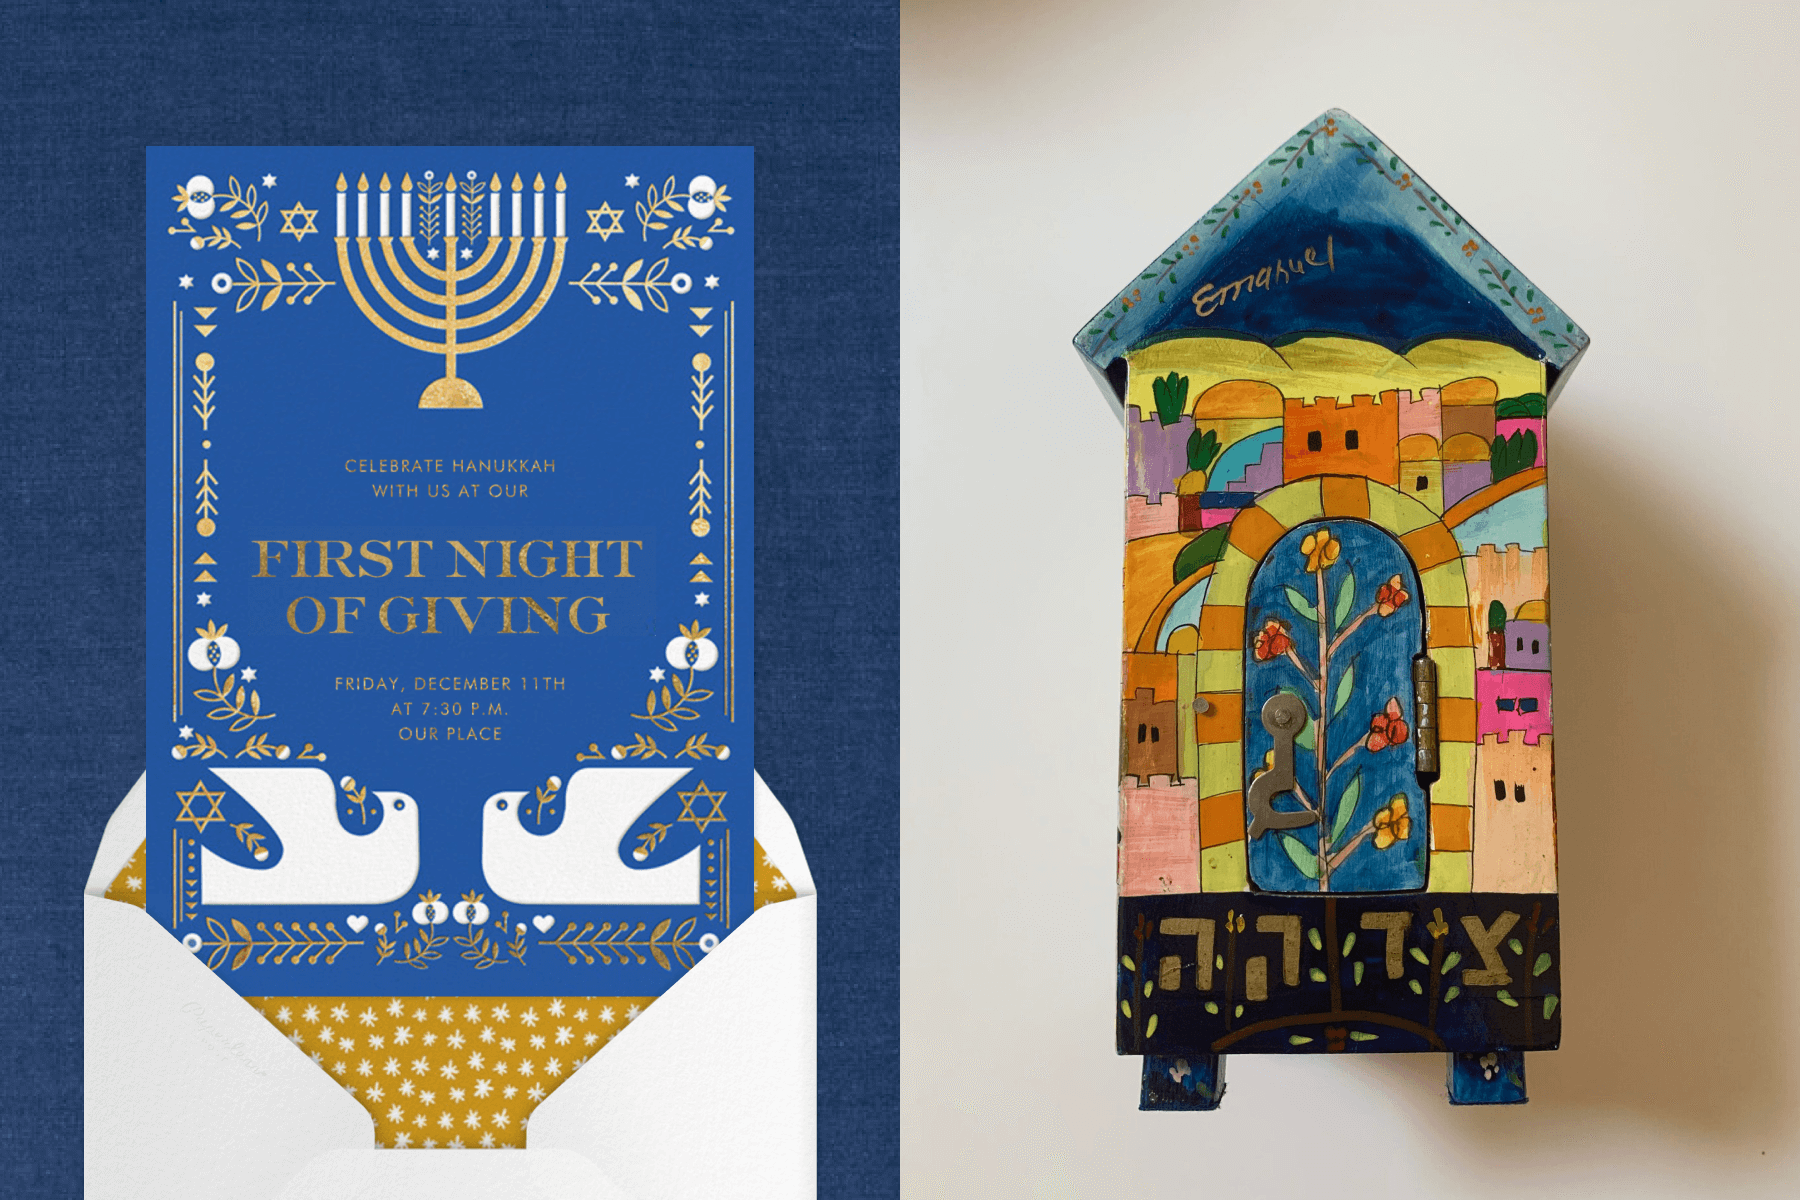 Left: A blue Hanukkah invitation with a mirrored folksy illustration of a Chanukkiah, white doves, and gold leaves. Right: A hand-painted tzedakah box shaped like a house with colorful buildings, flowers, and Hebrew letters.